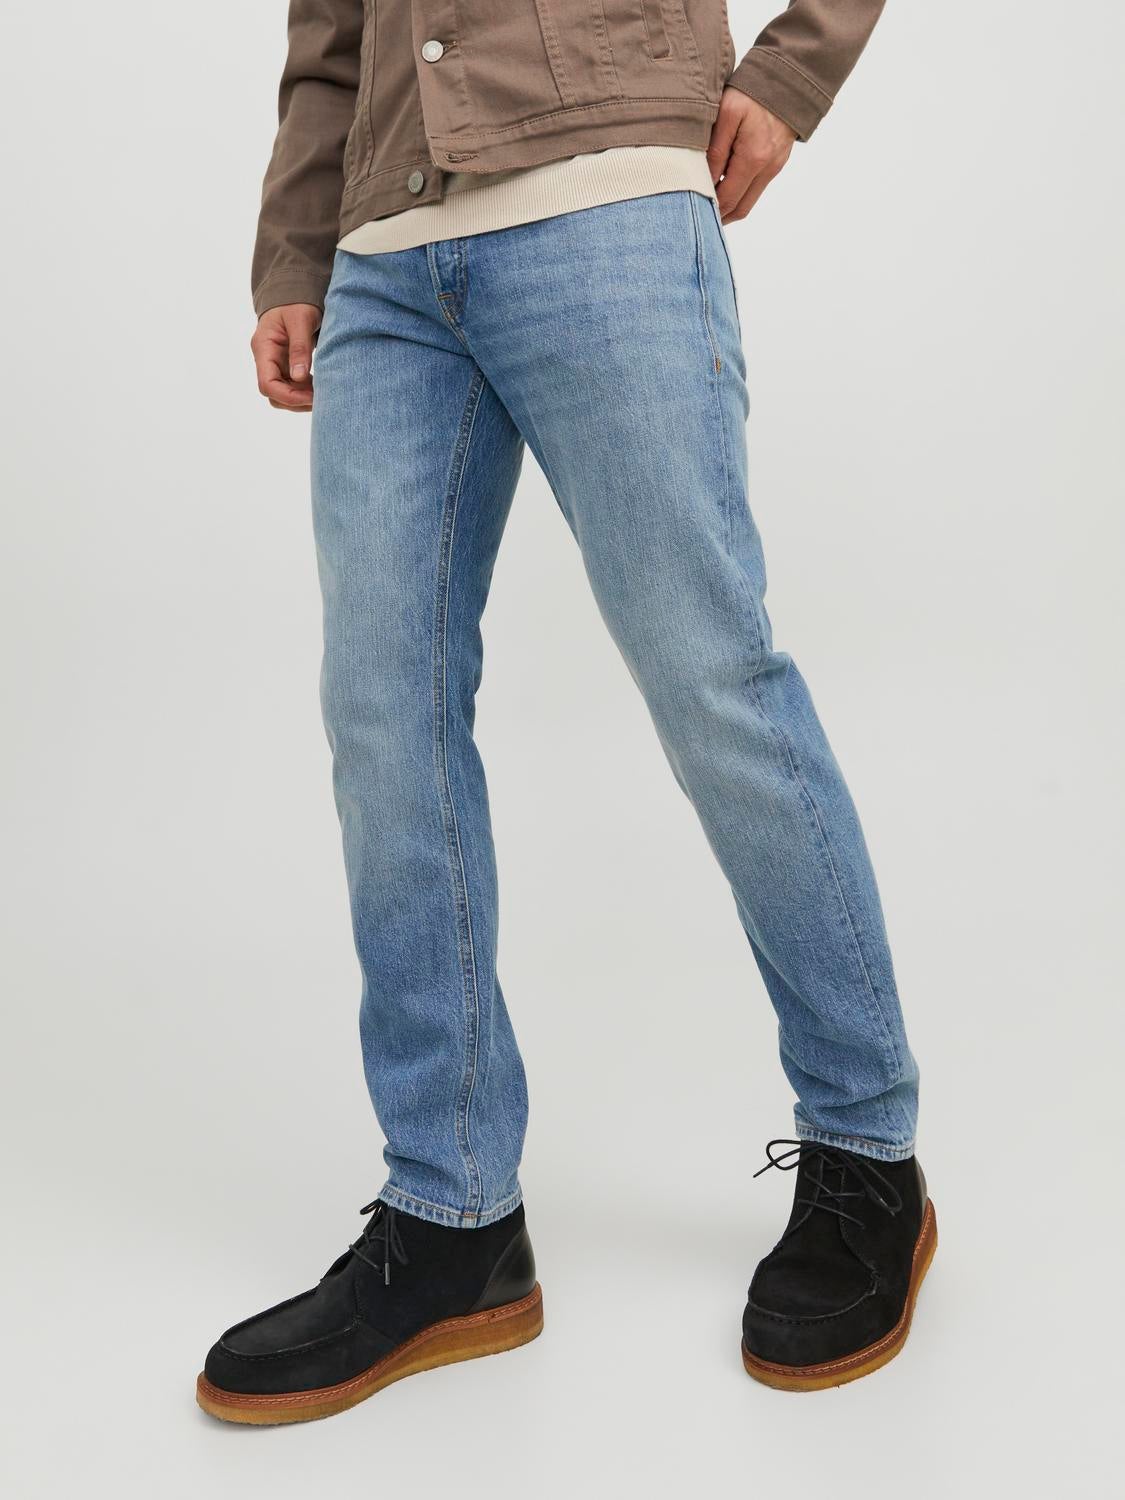 Jack Jones jeans stock - Mixed models, Lots from 200 units, Well-assorted  sizes, AVAILABLE VIDEO - Italy, New - The wholesale platform | Merkandi B2B